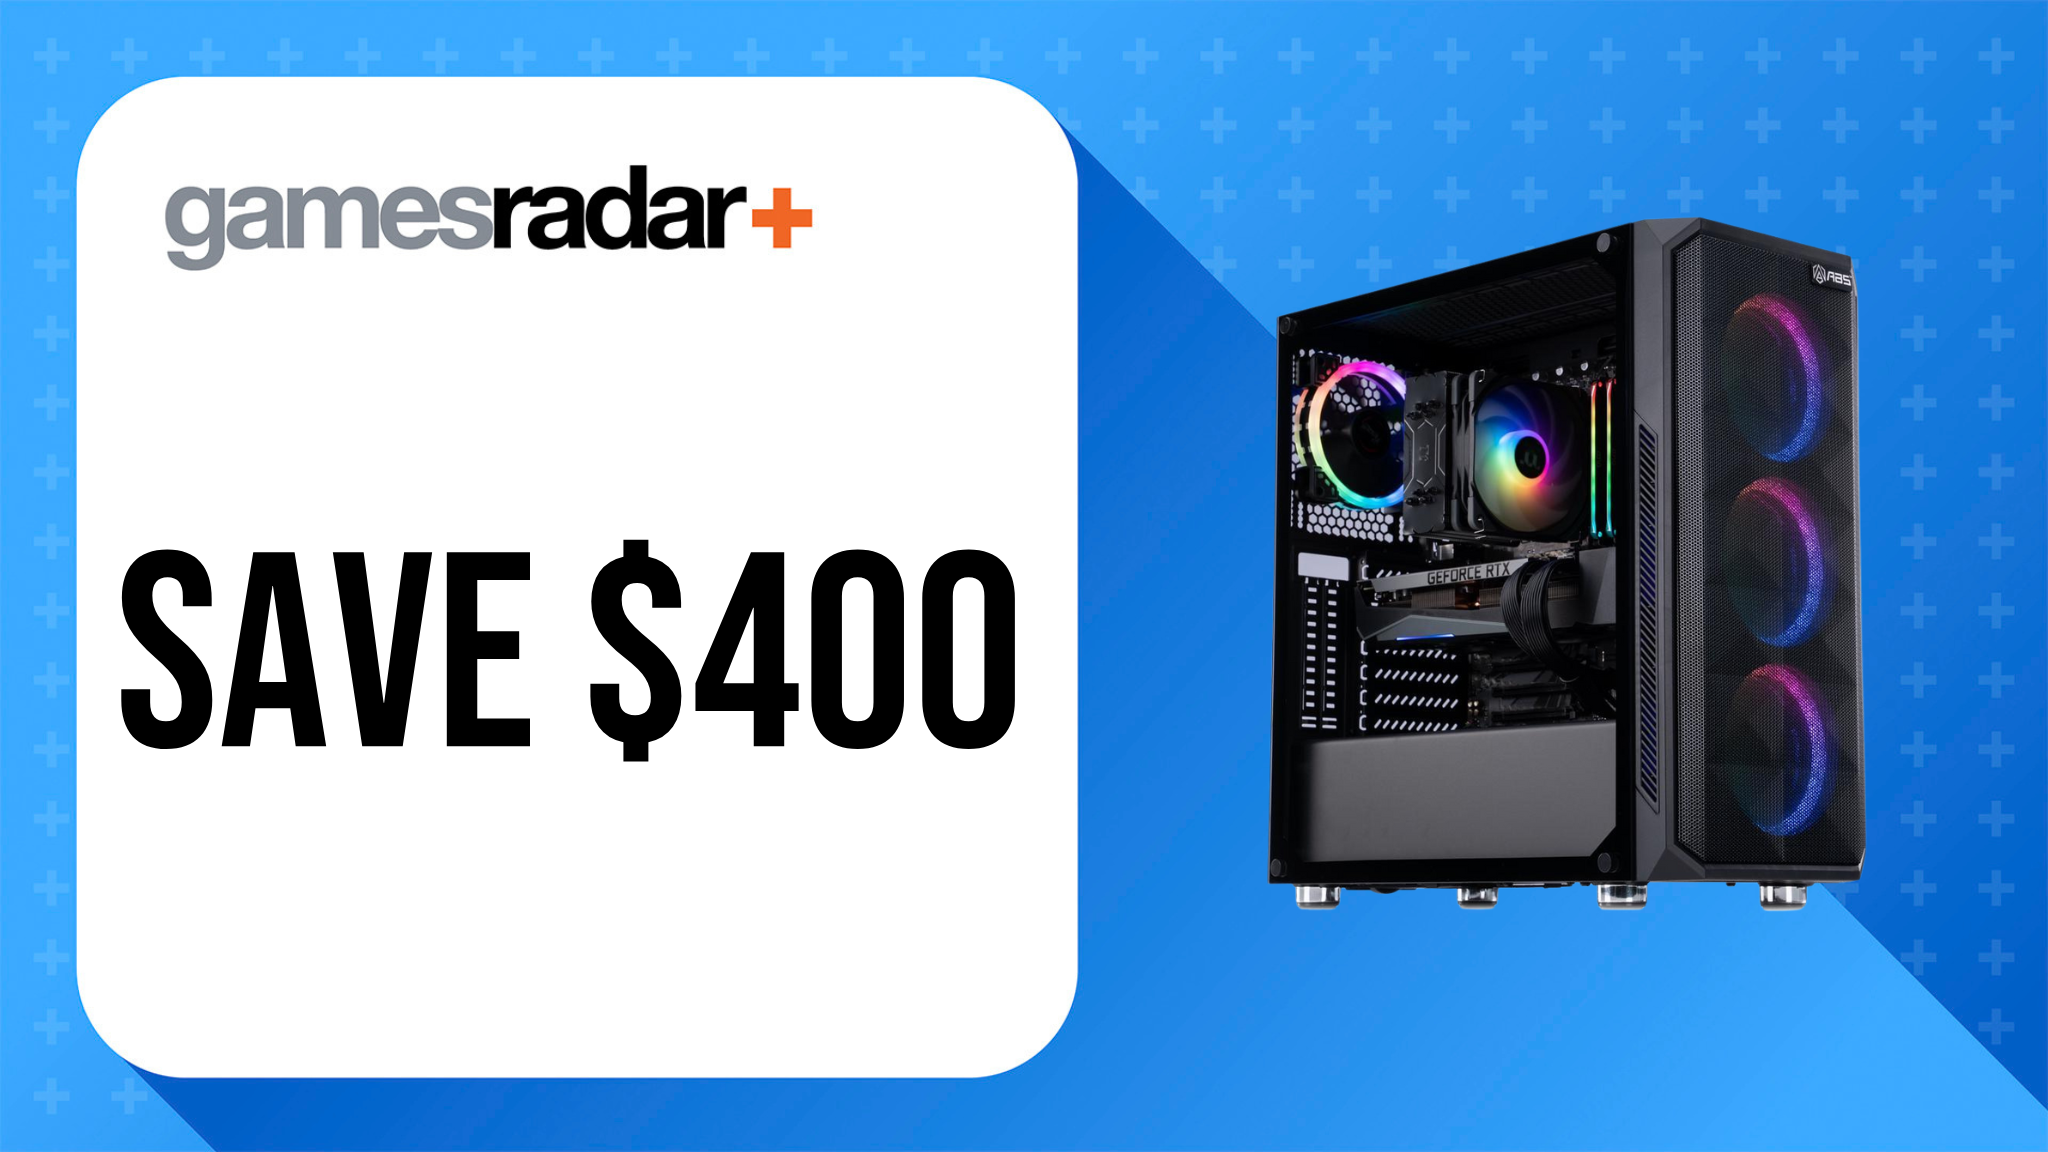 ABS Gladiator Gaming PC deal image with $400 saving stamp and Blue background